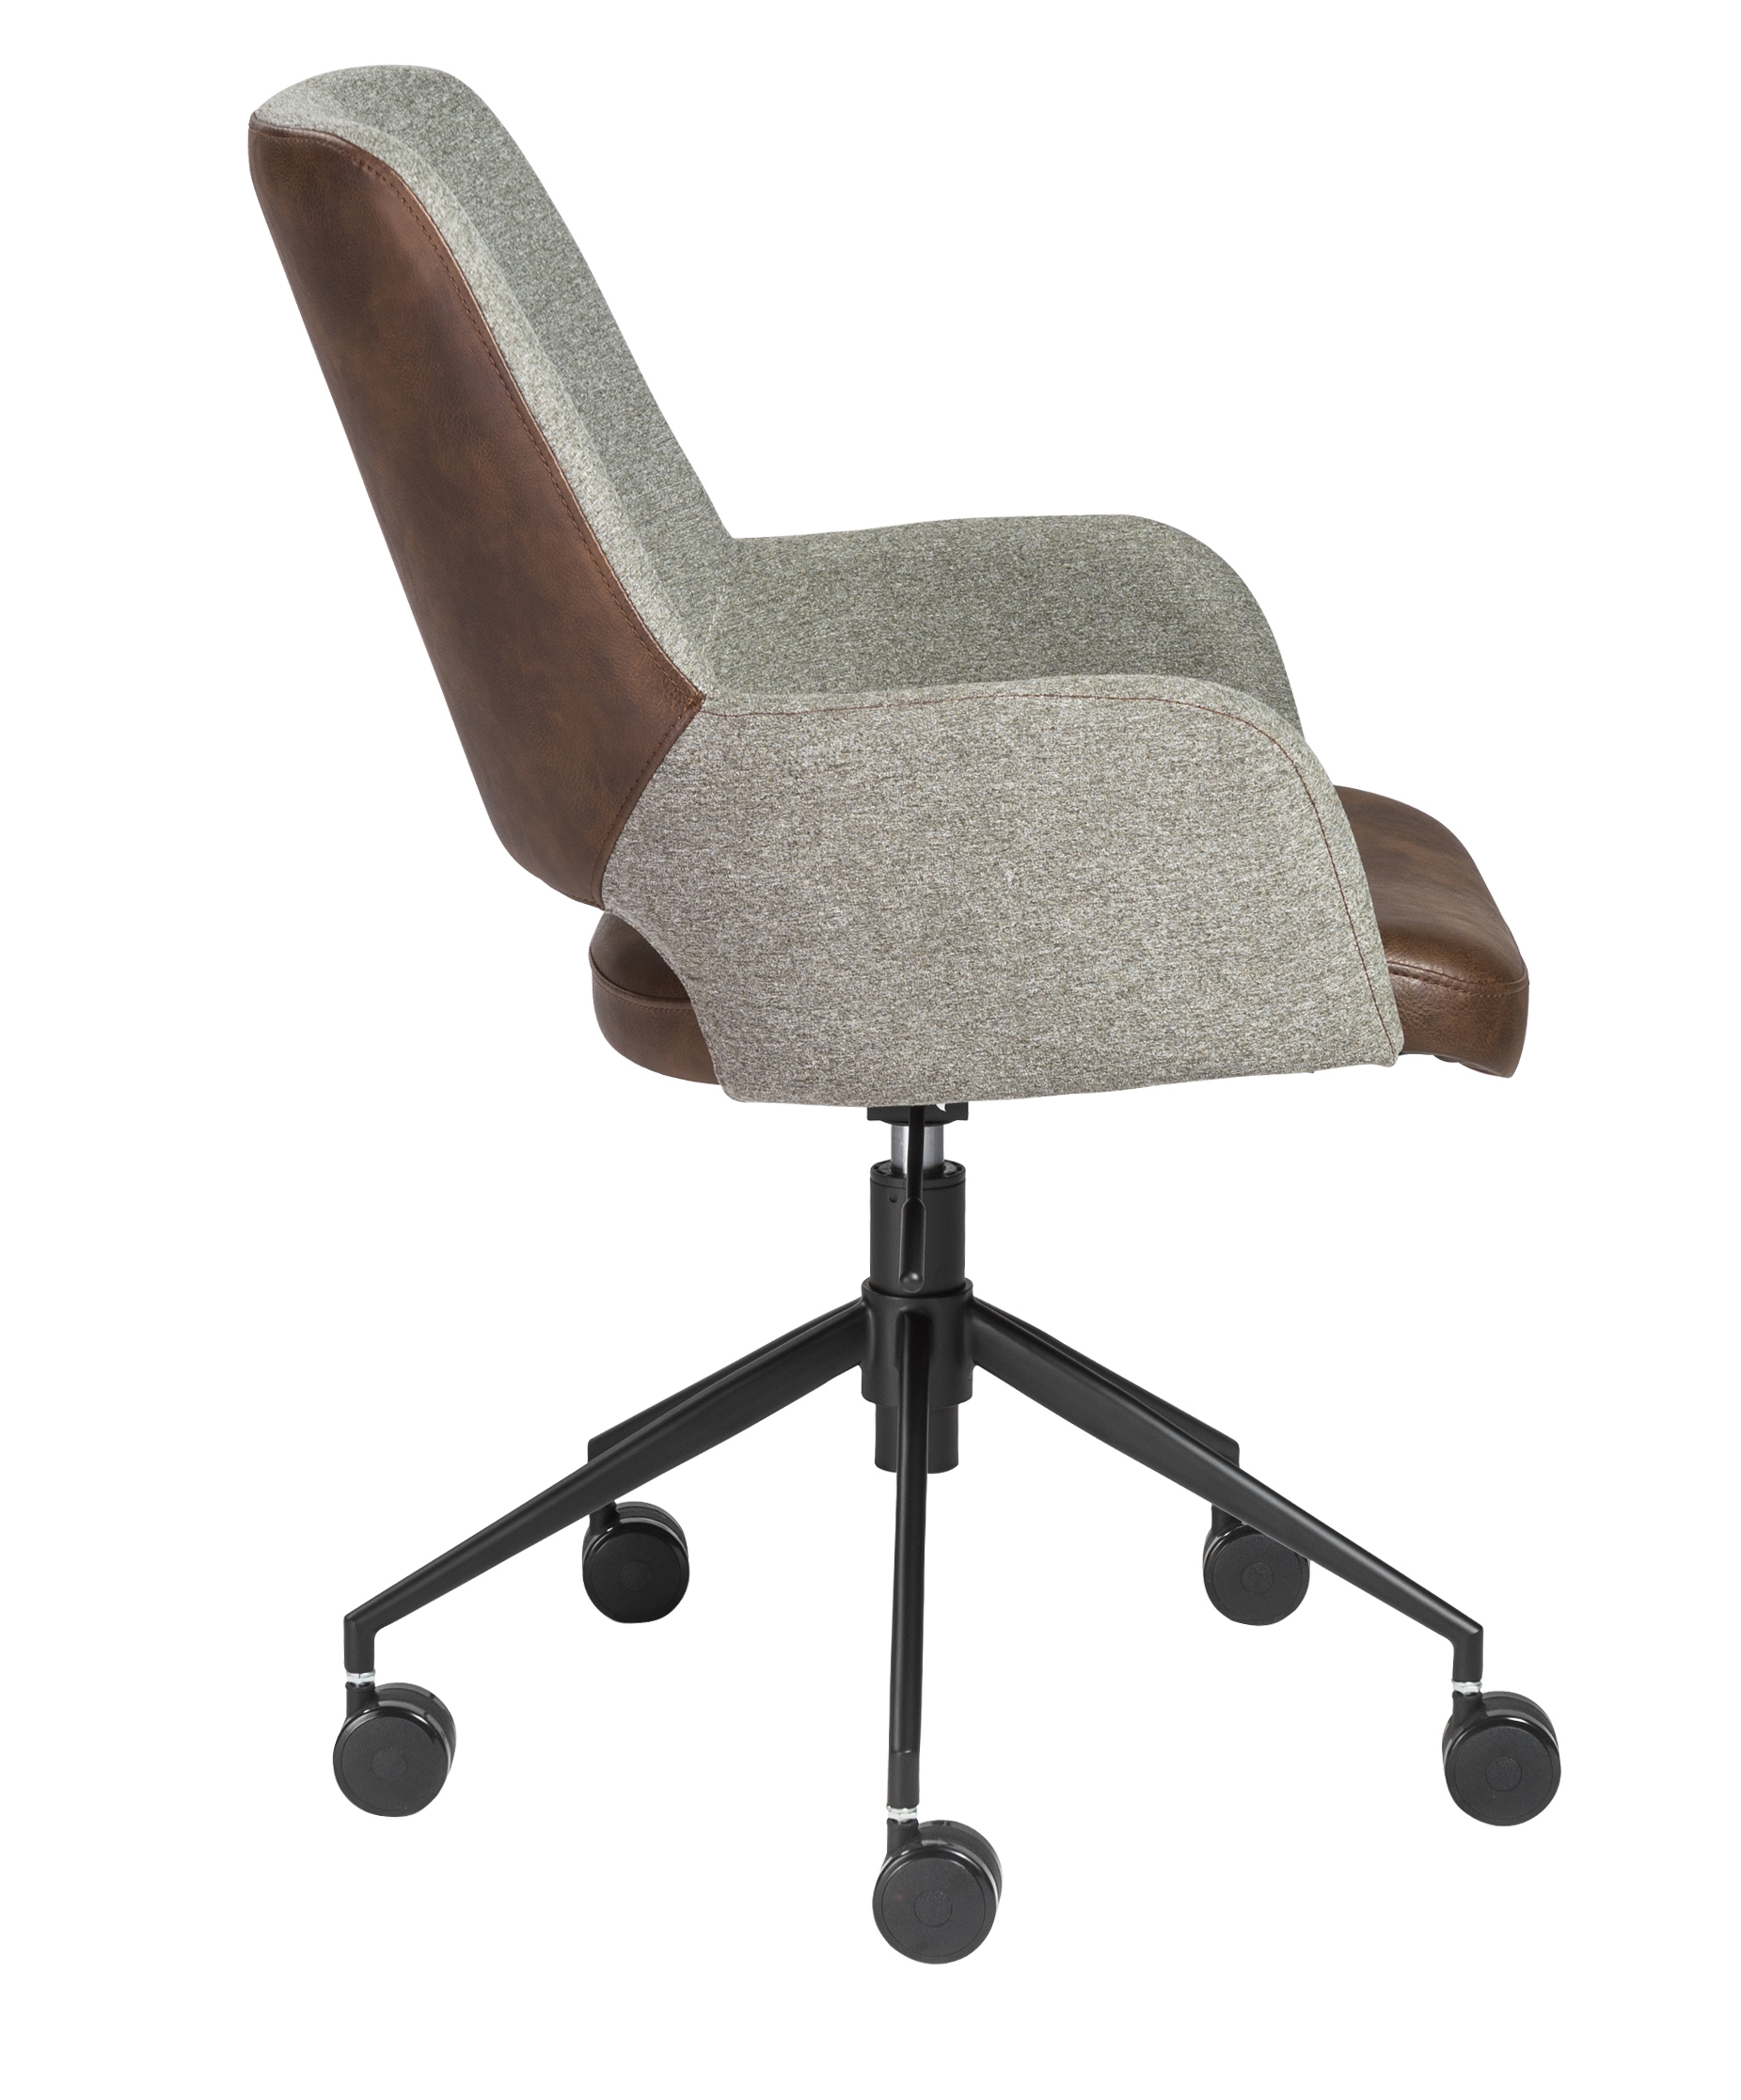 Randy Office Chair, Gray and Brown - Image 2